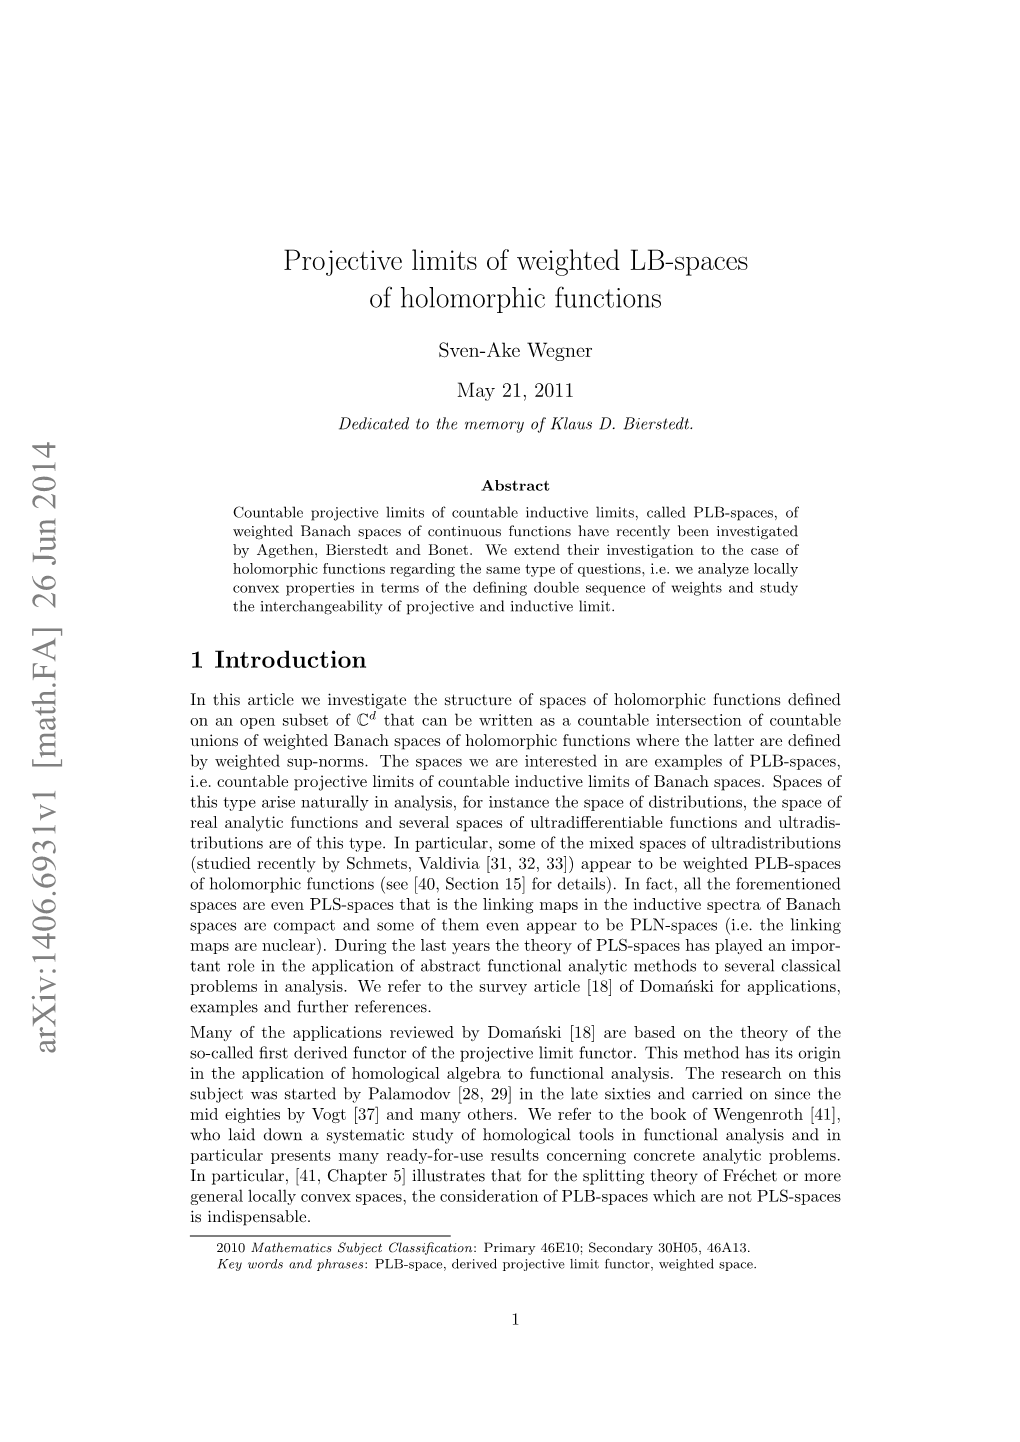 Projective Limits of Weighted LB-Spaces of Holomorphic Functions